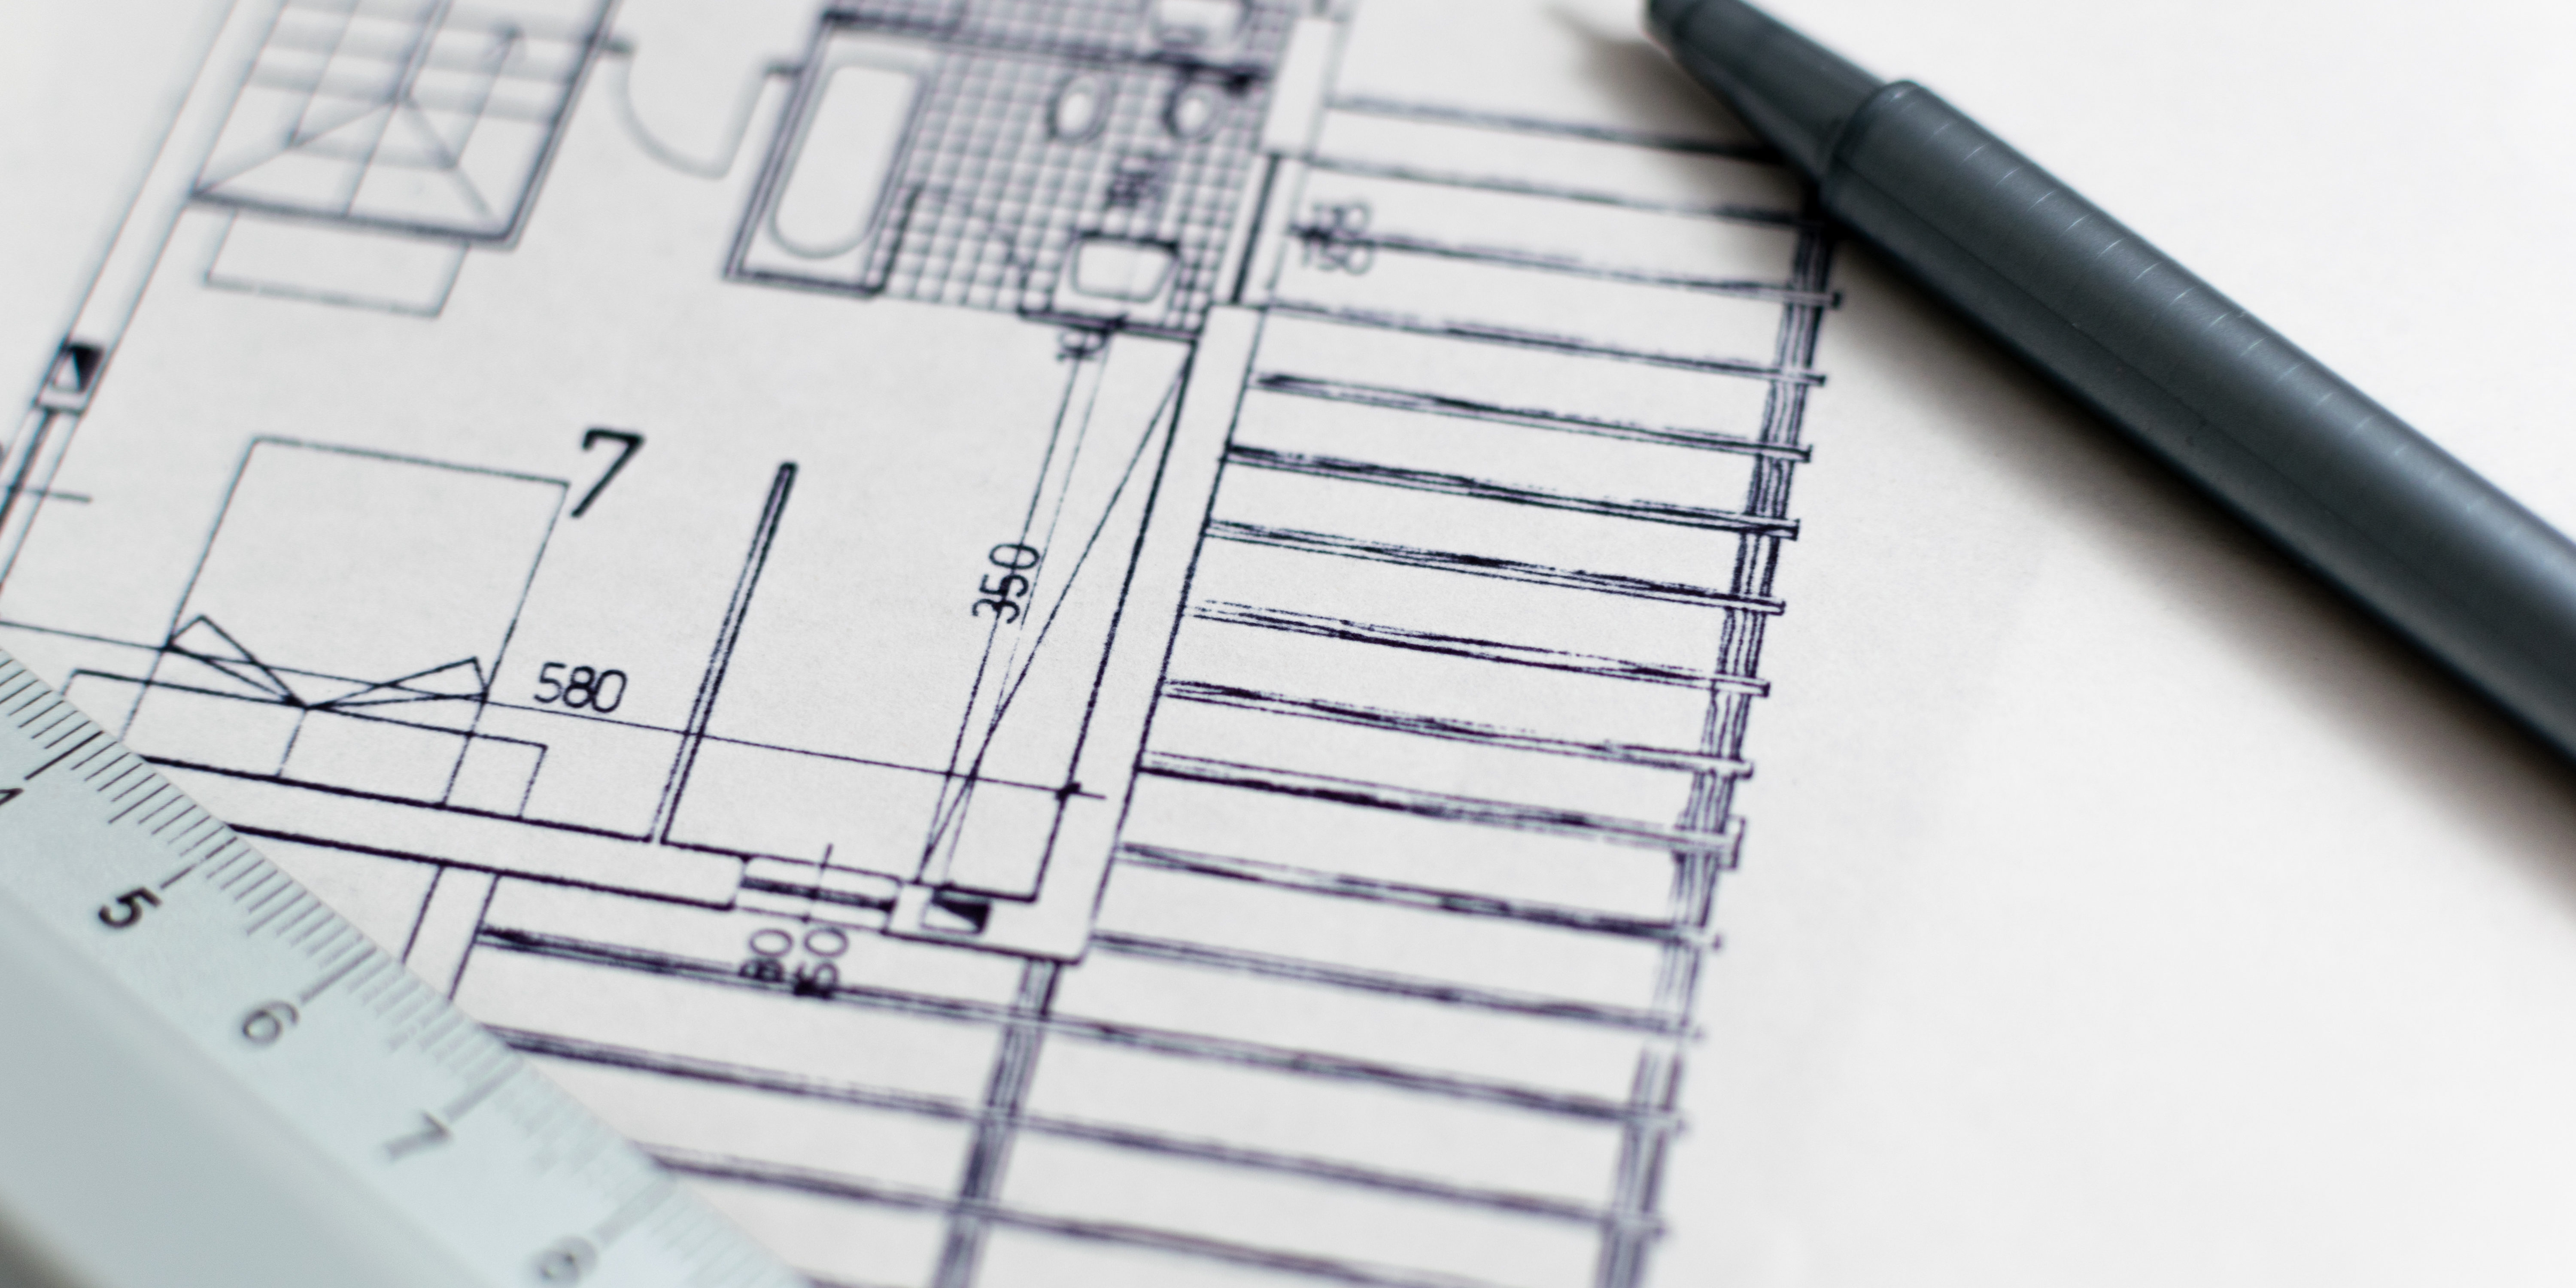 Architecture blueprint with pen and ruler